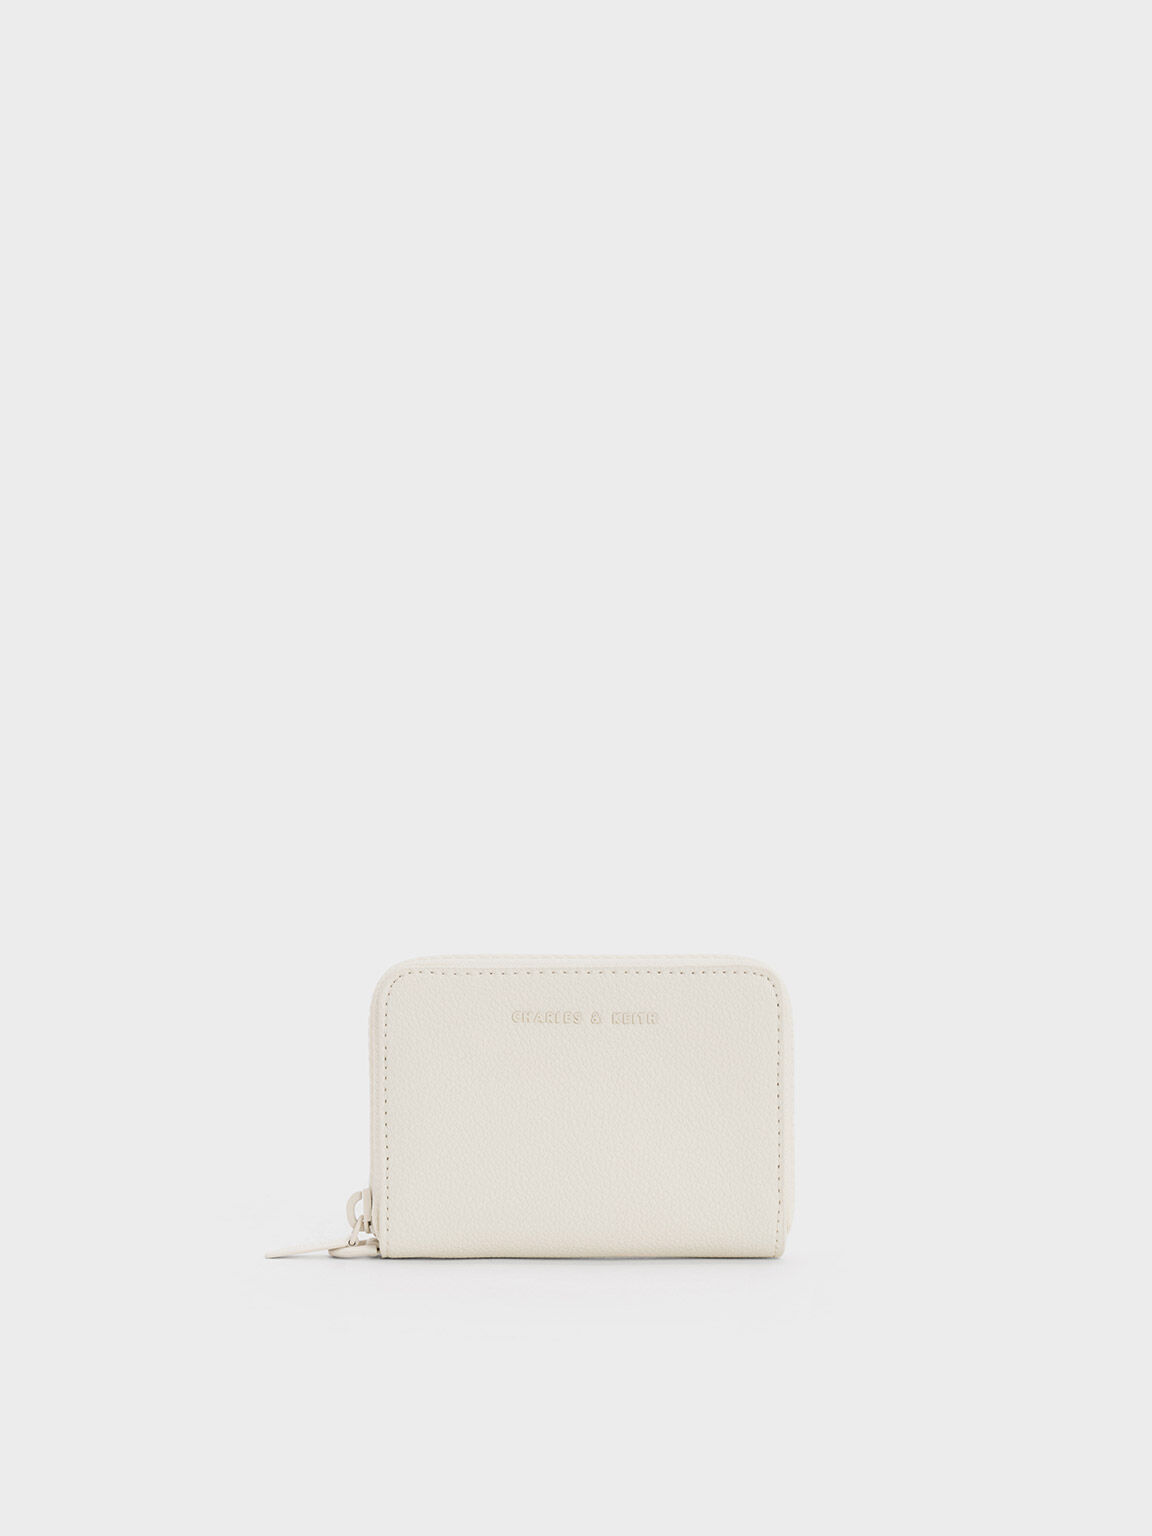 dompet Charles and keith